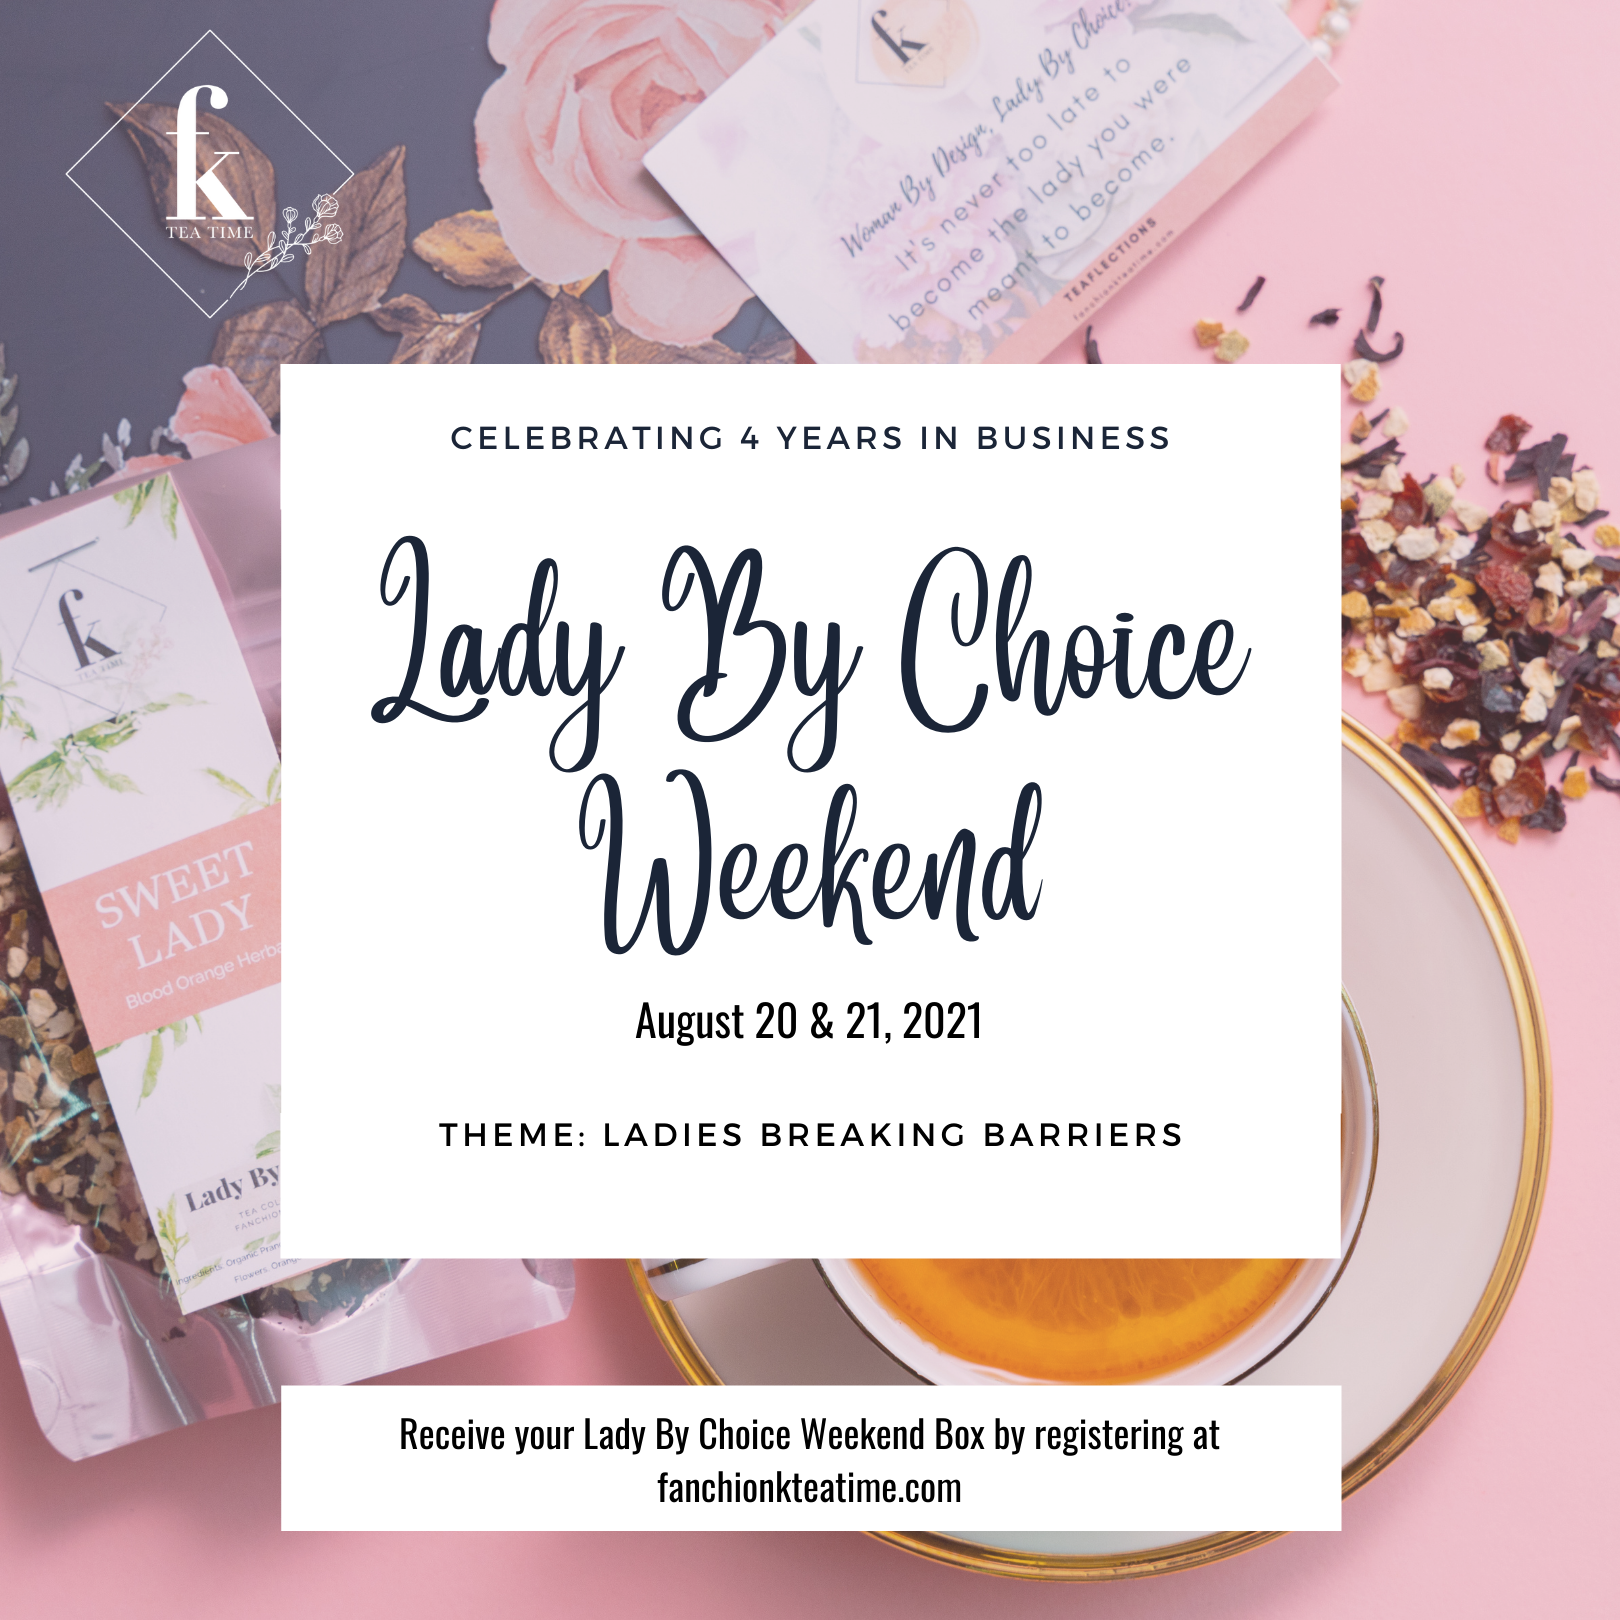 LADY BY CHOICE WEEKEND